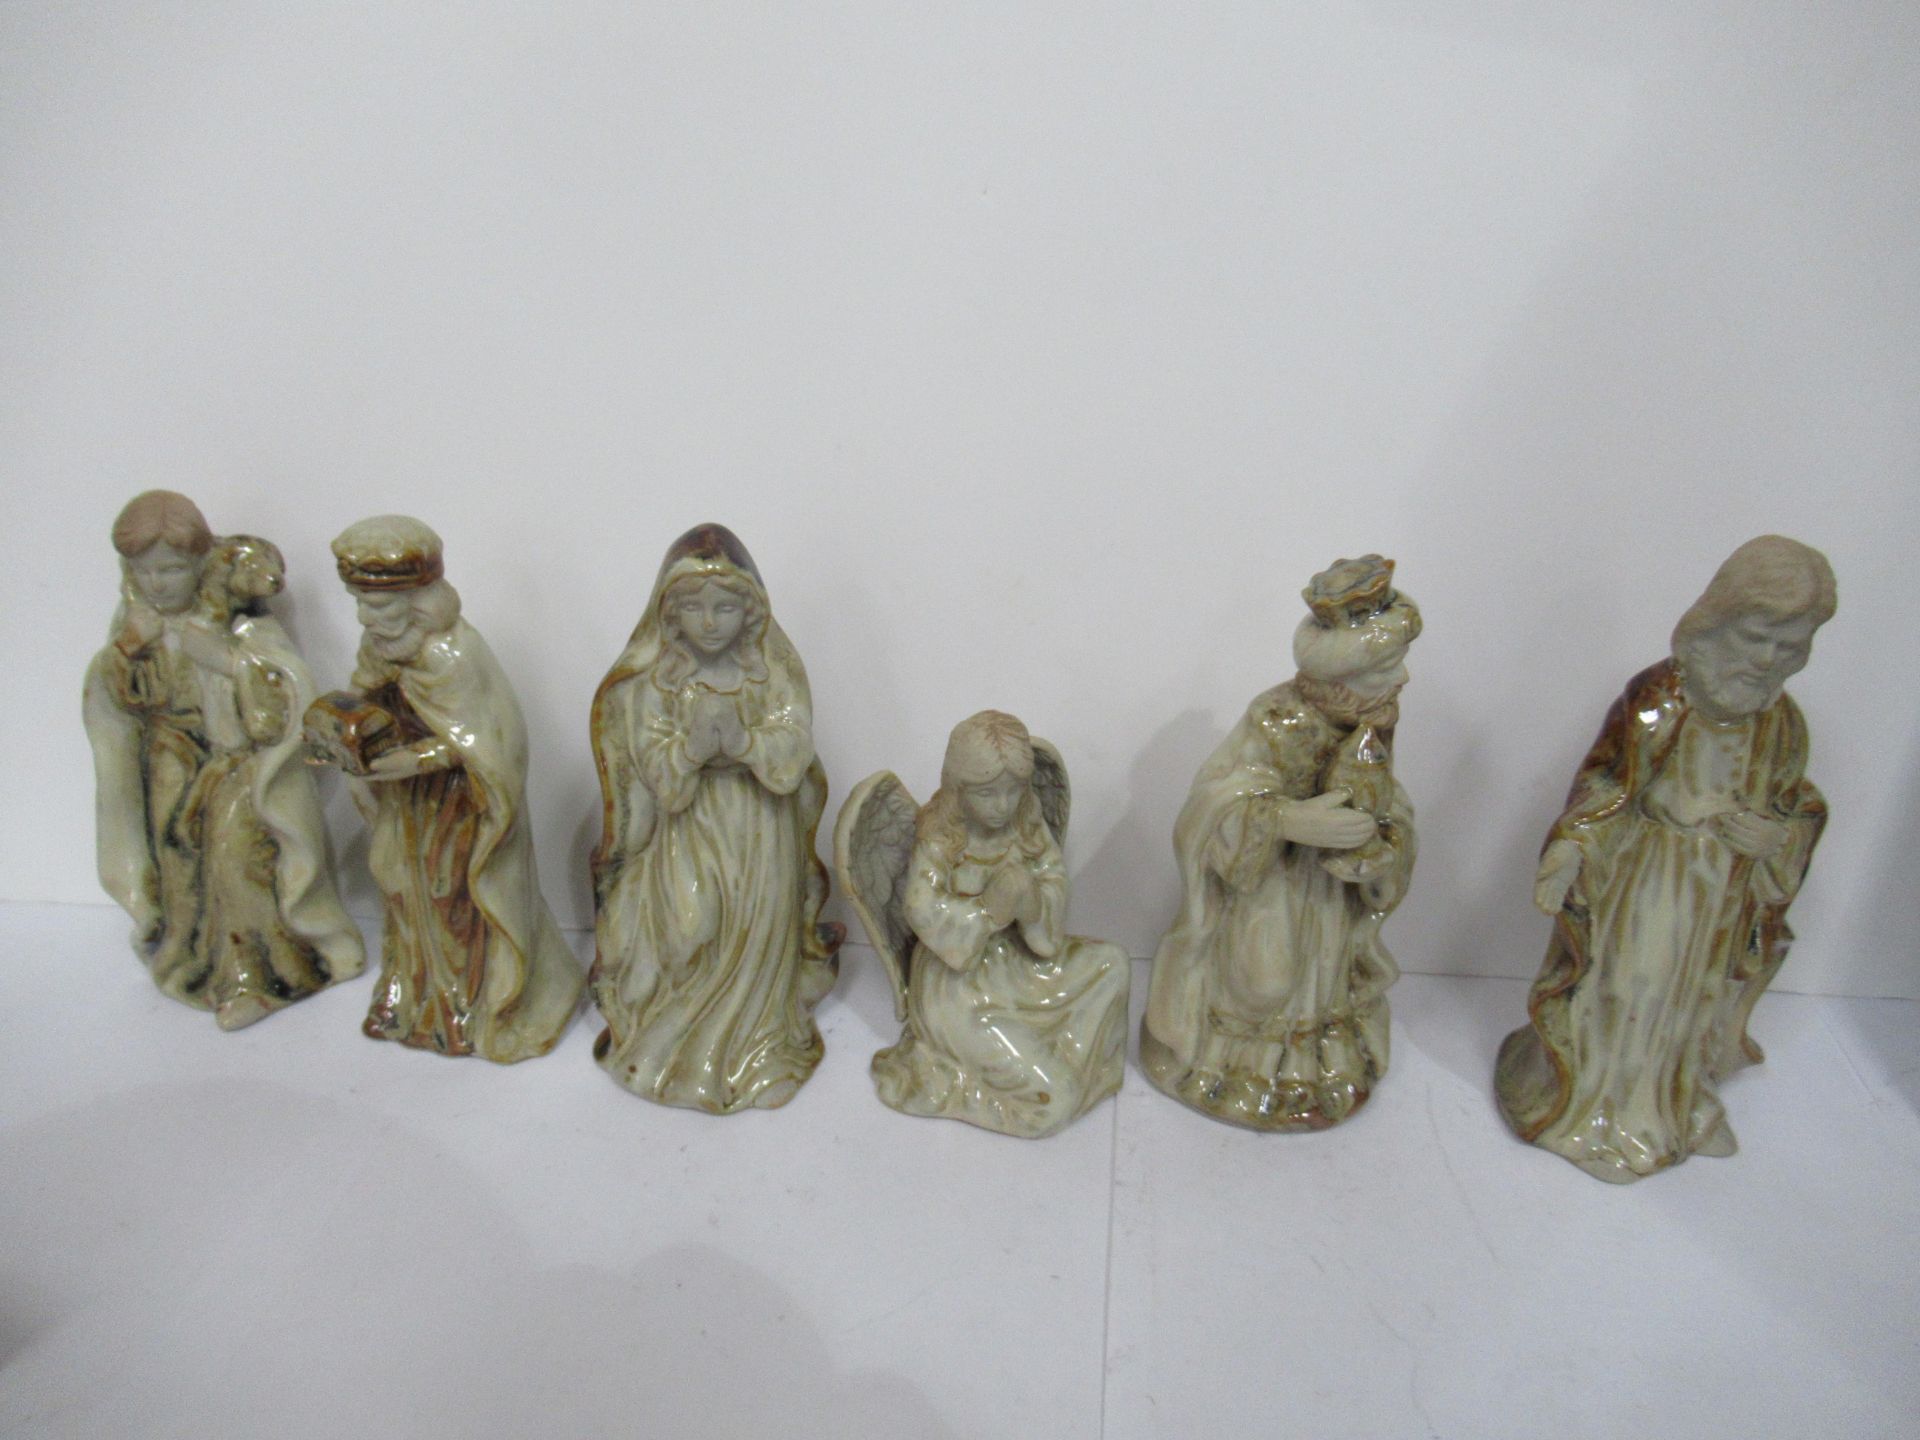 Nativity scene, 4x model houses and tall figure of Santa - Image 10 of 11